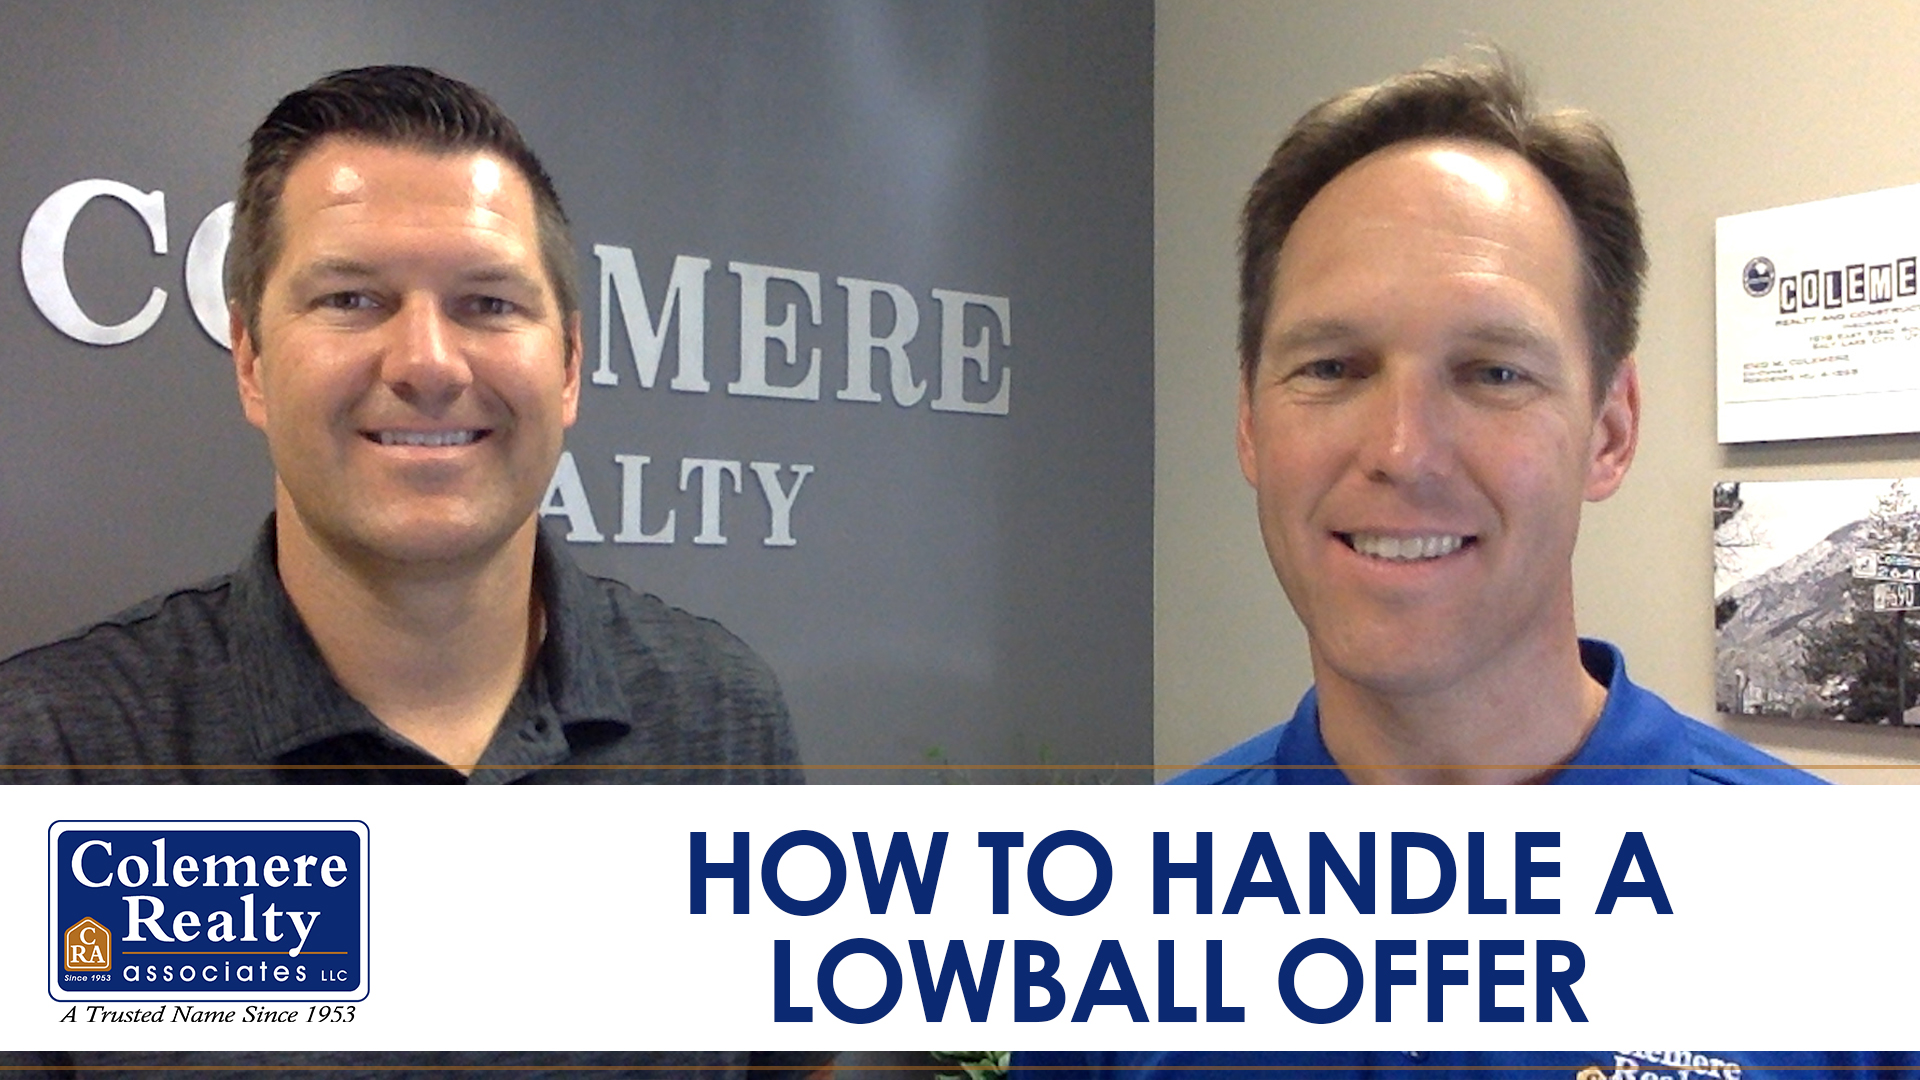 What to Do If You Receive a Lowball Offer